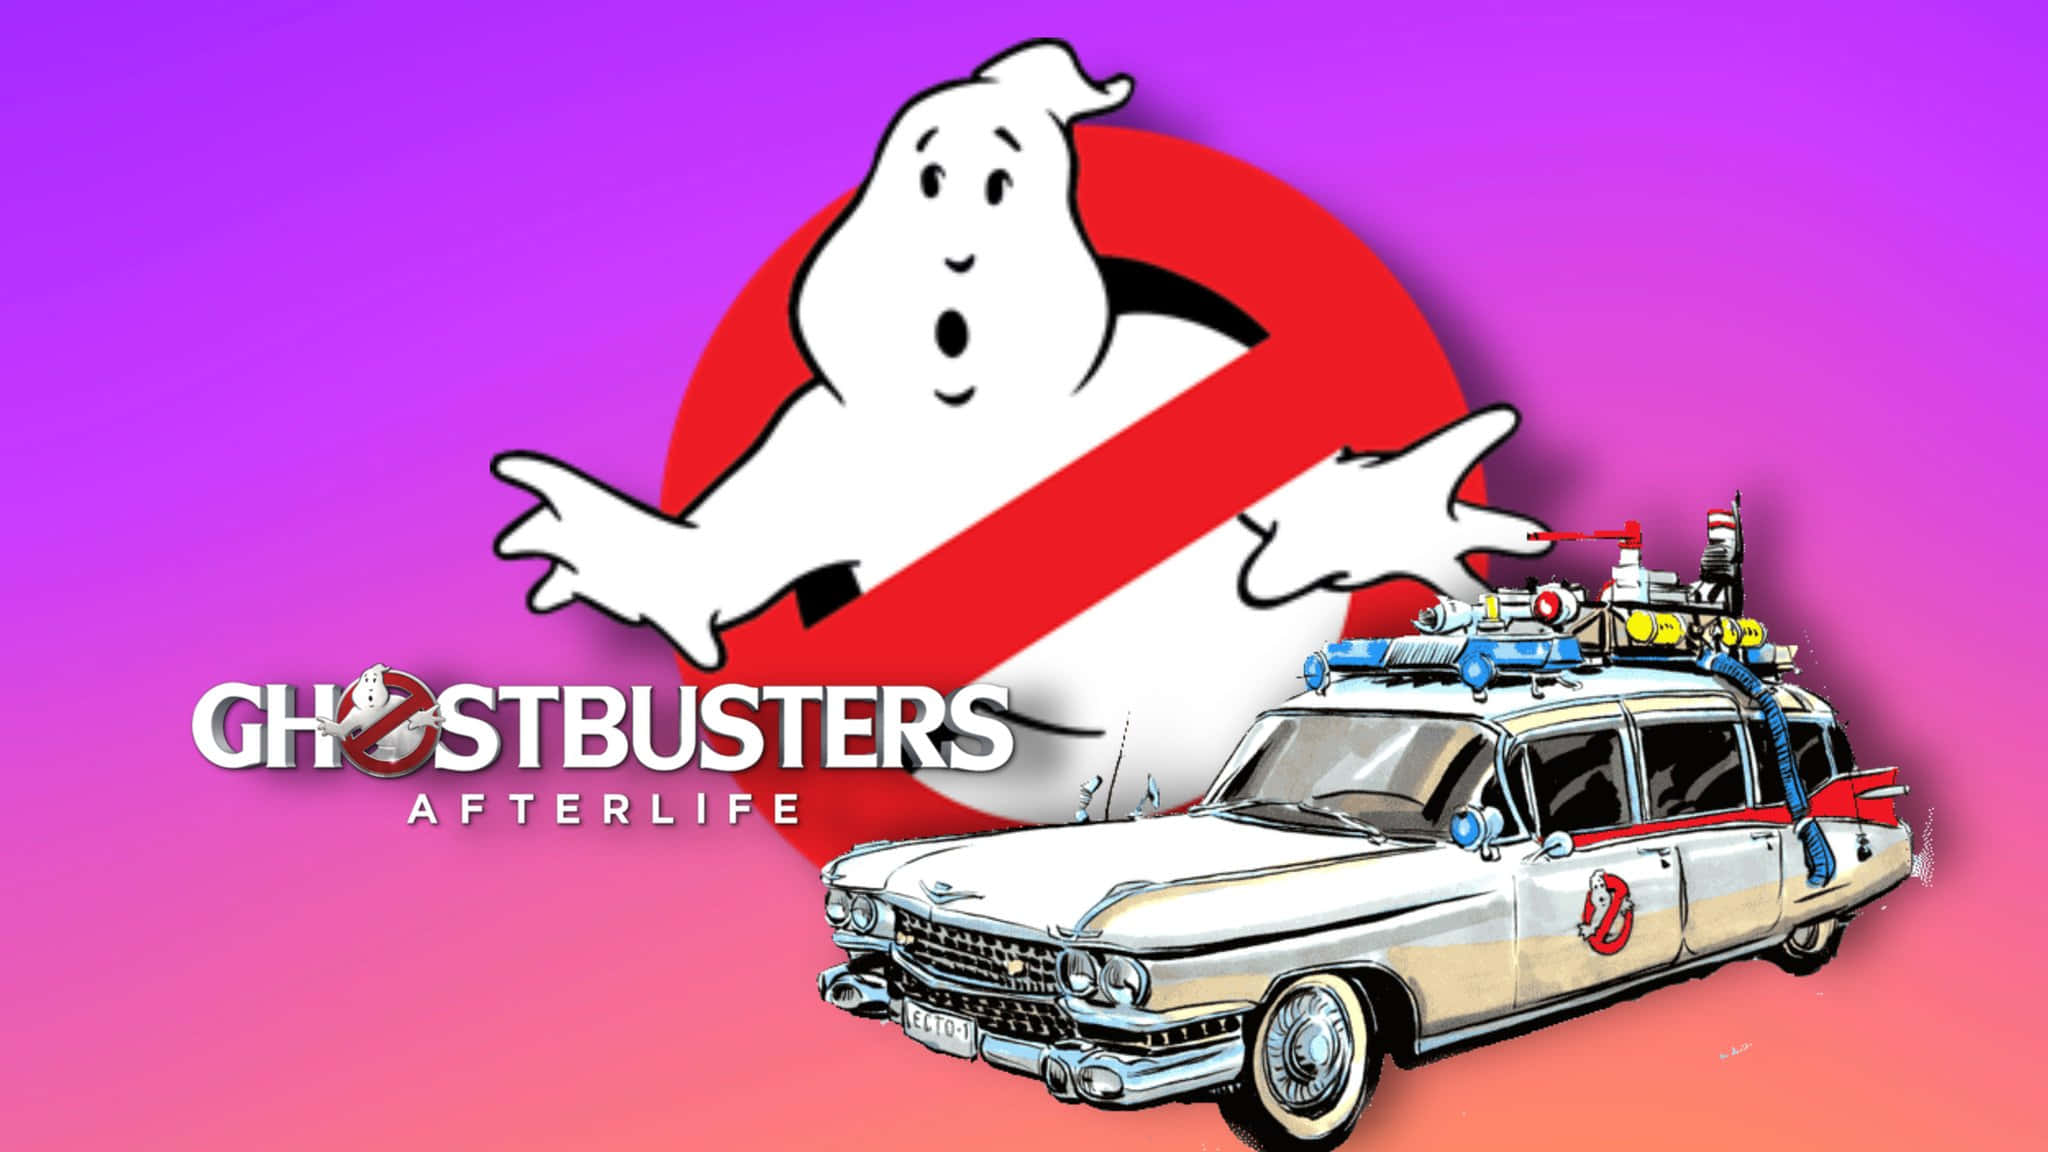 The Iconic Ghostbusters Team Gearing Up for Action